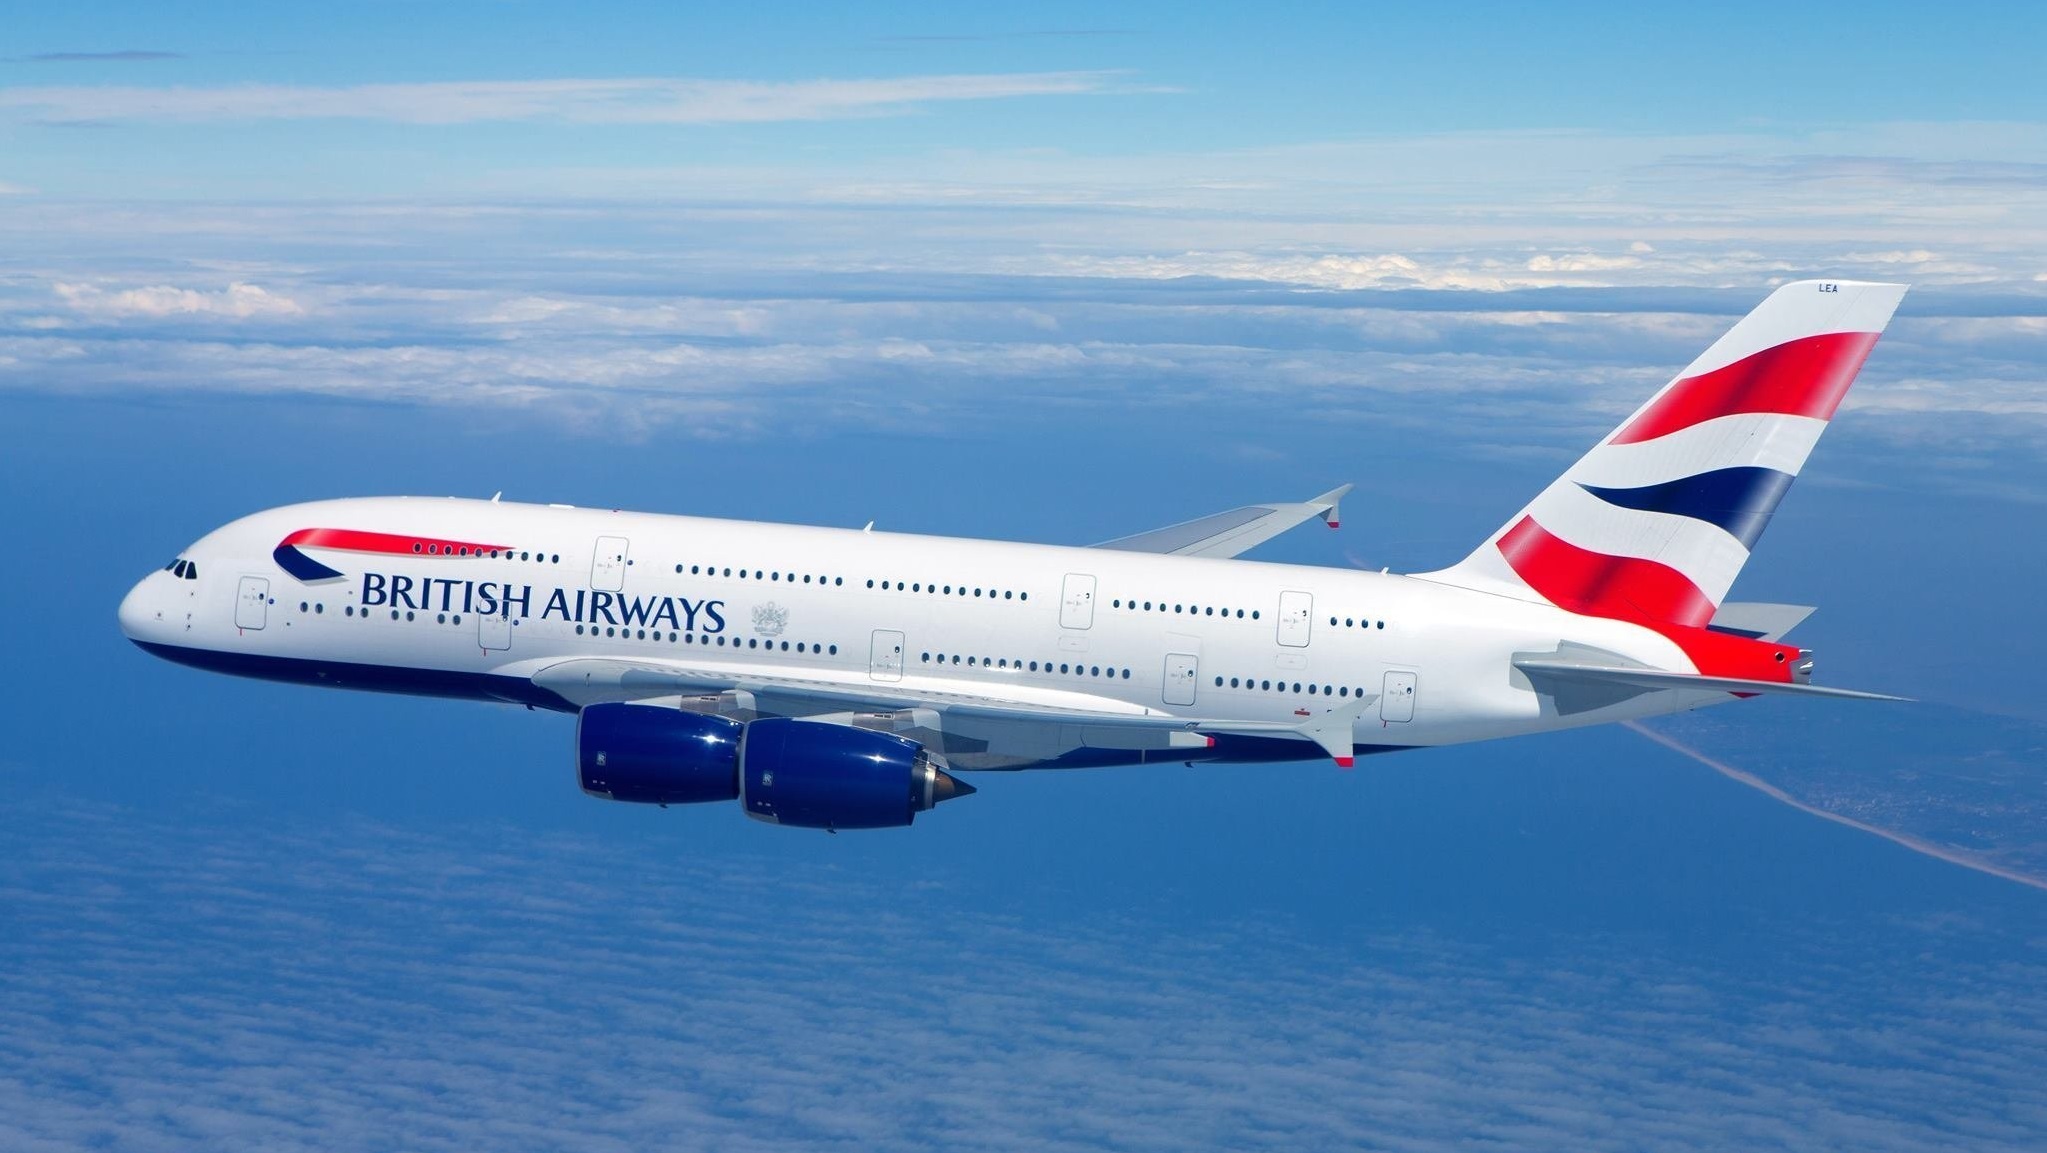 British Airways Adds More Direct Flights to the US Route Network